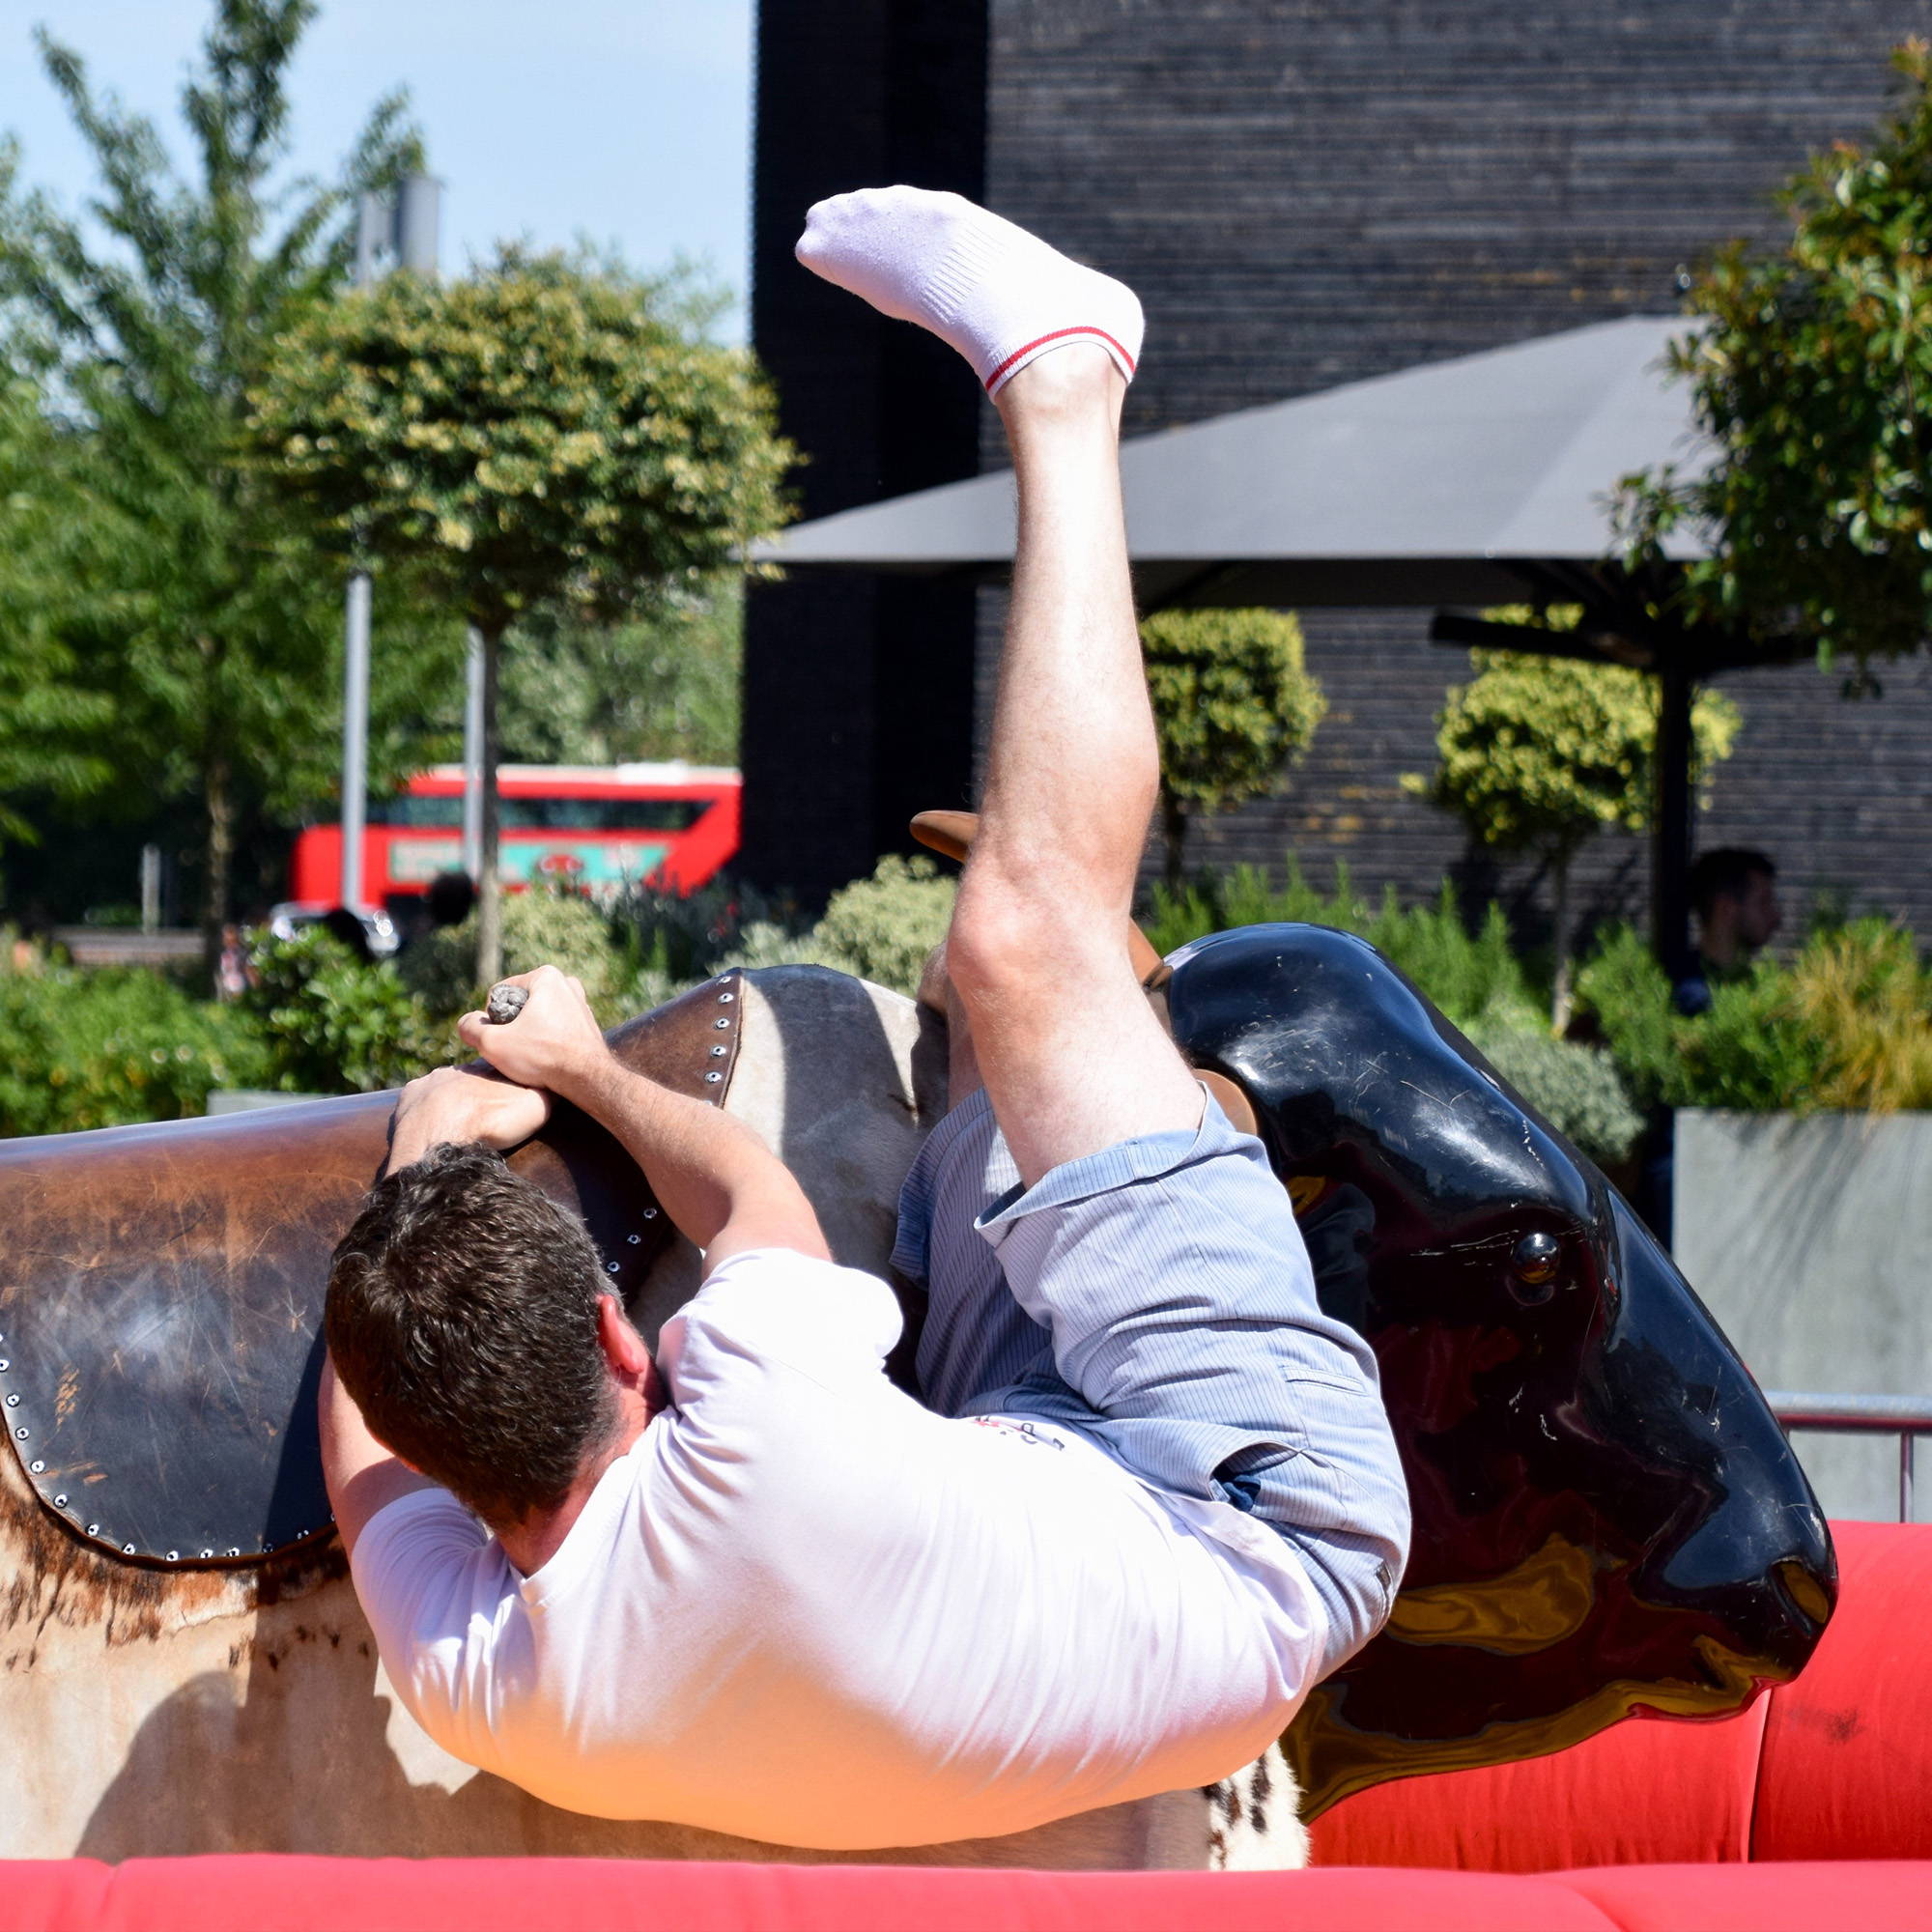 A person struggles to hold on, while riding a mechanical bull